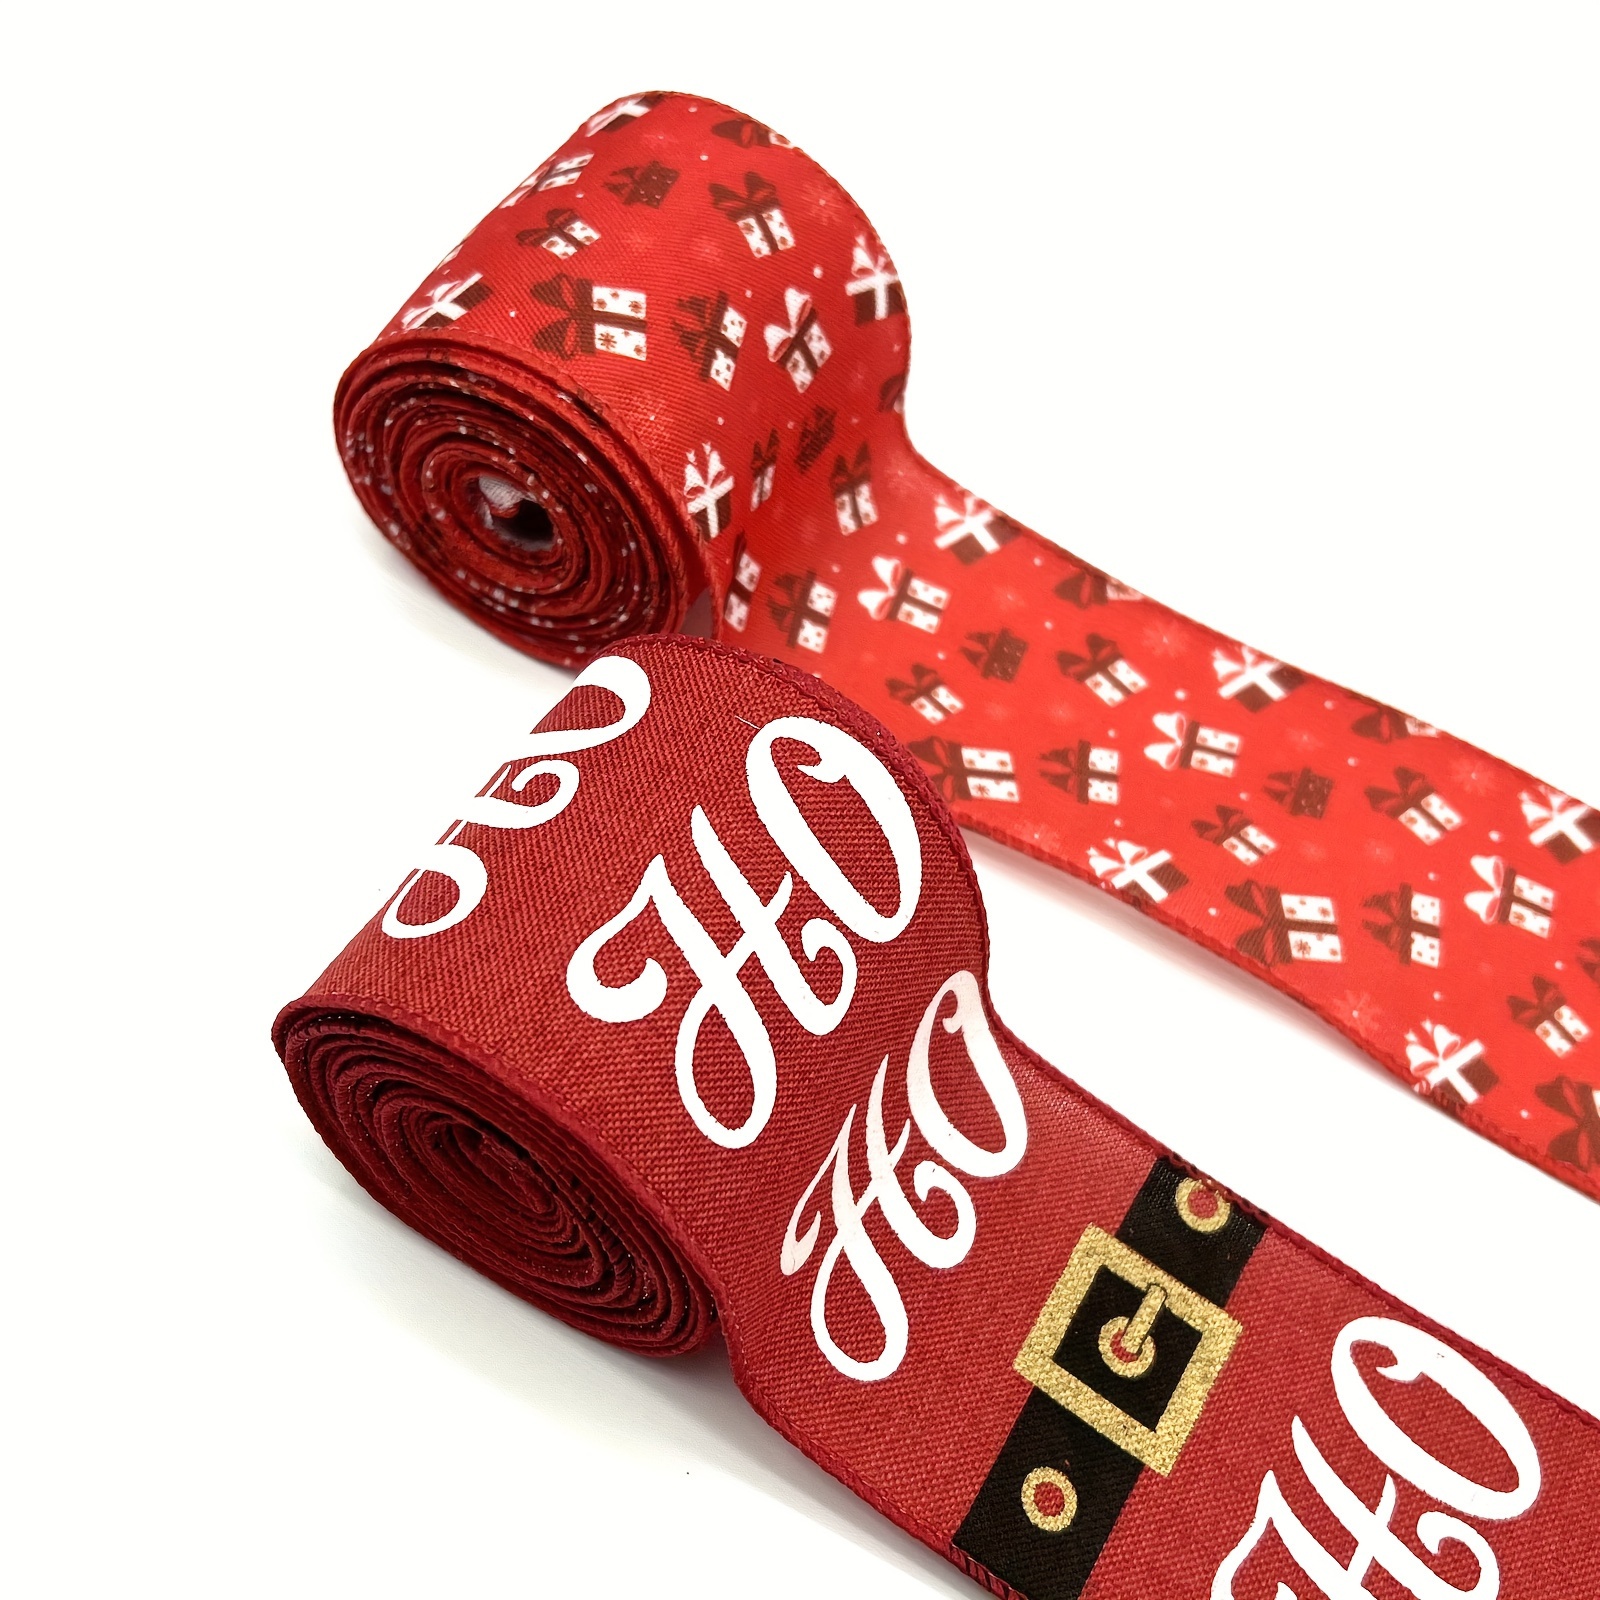 LOUIS VUITTON Red Gift Ribbon with Gold Lettering 2 yards